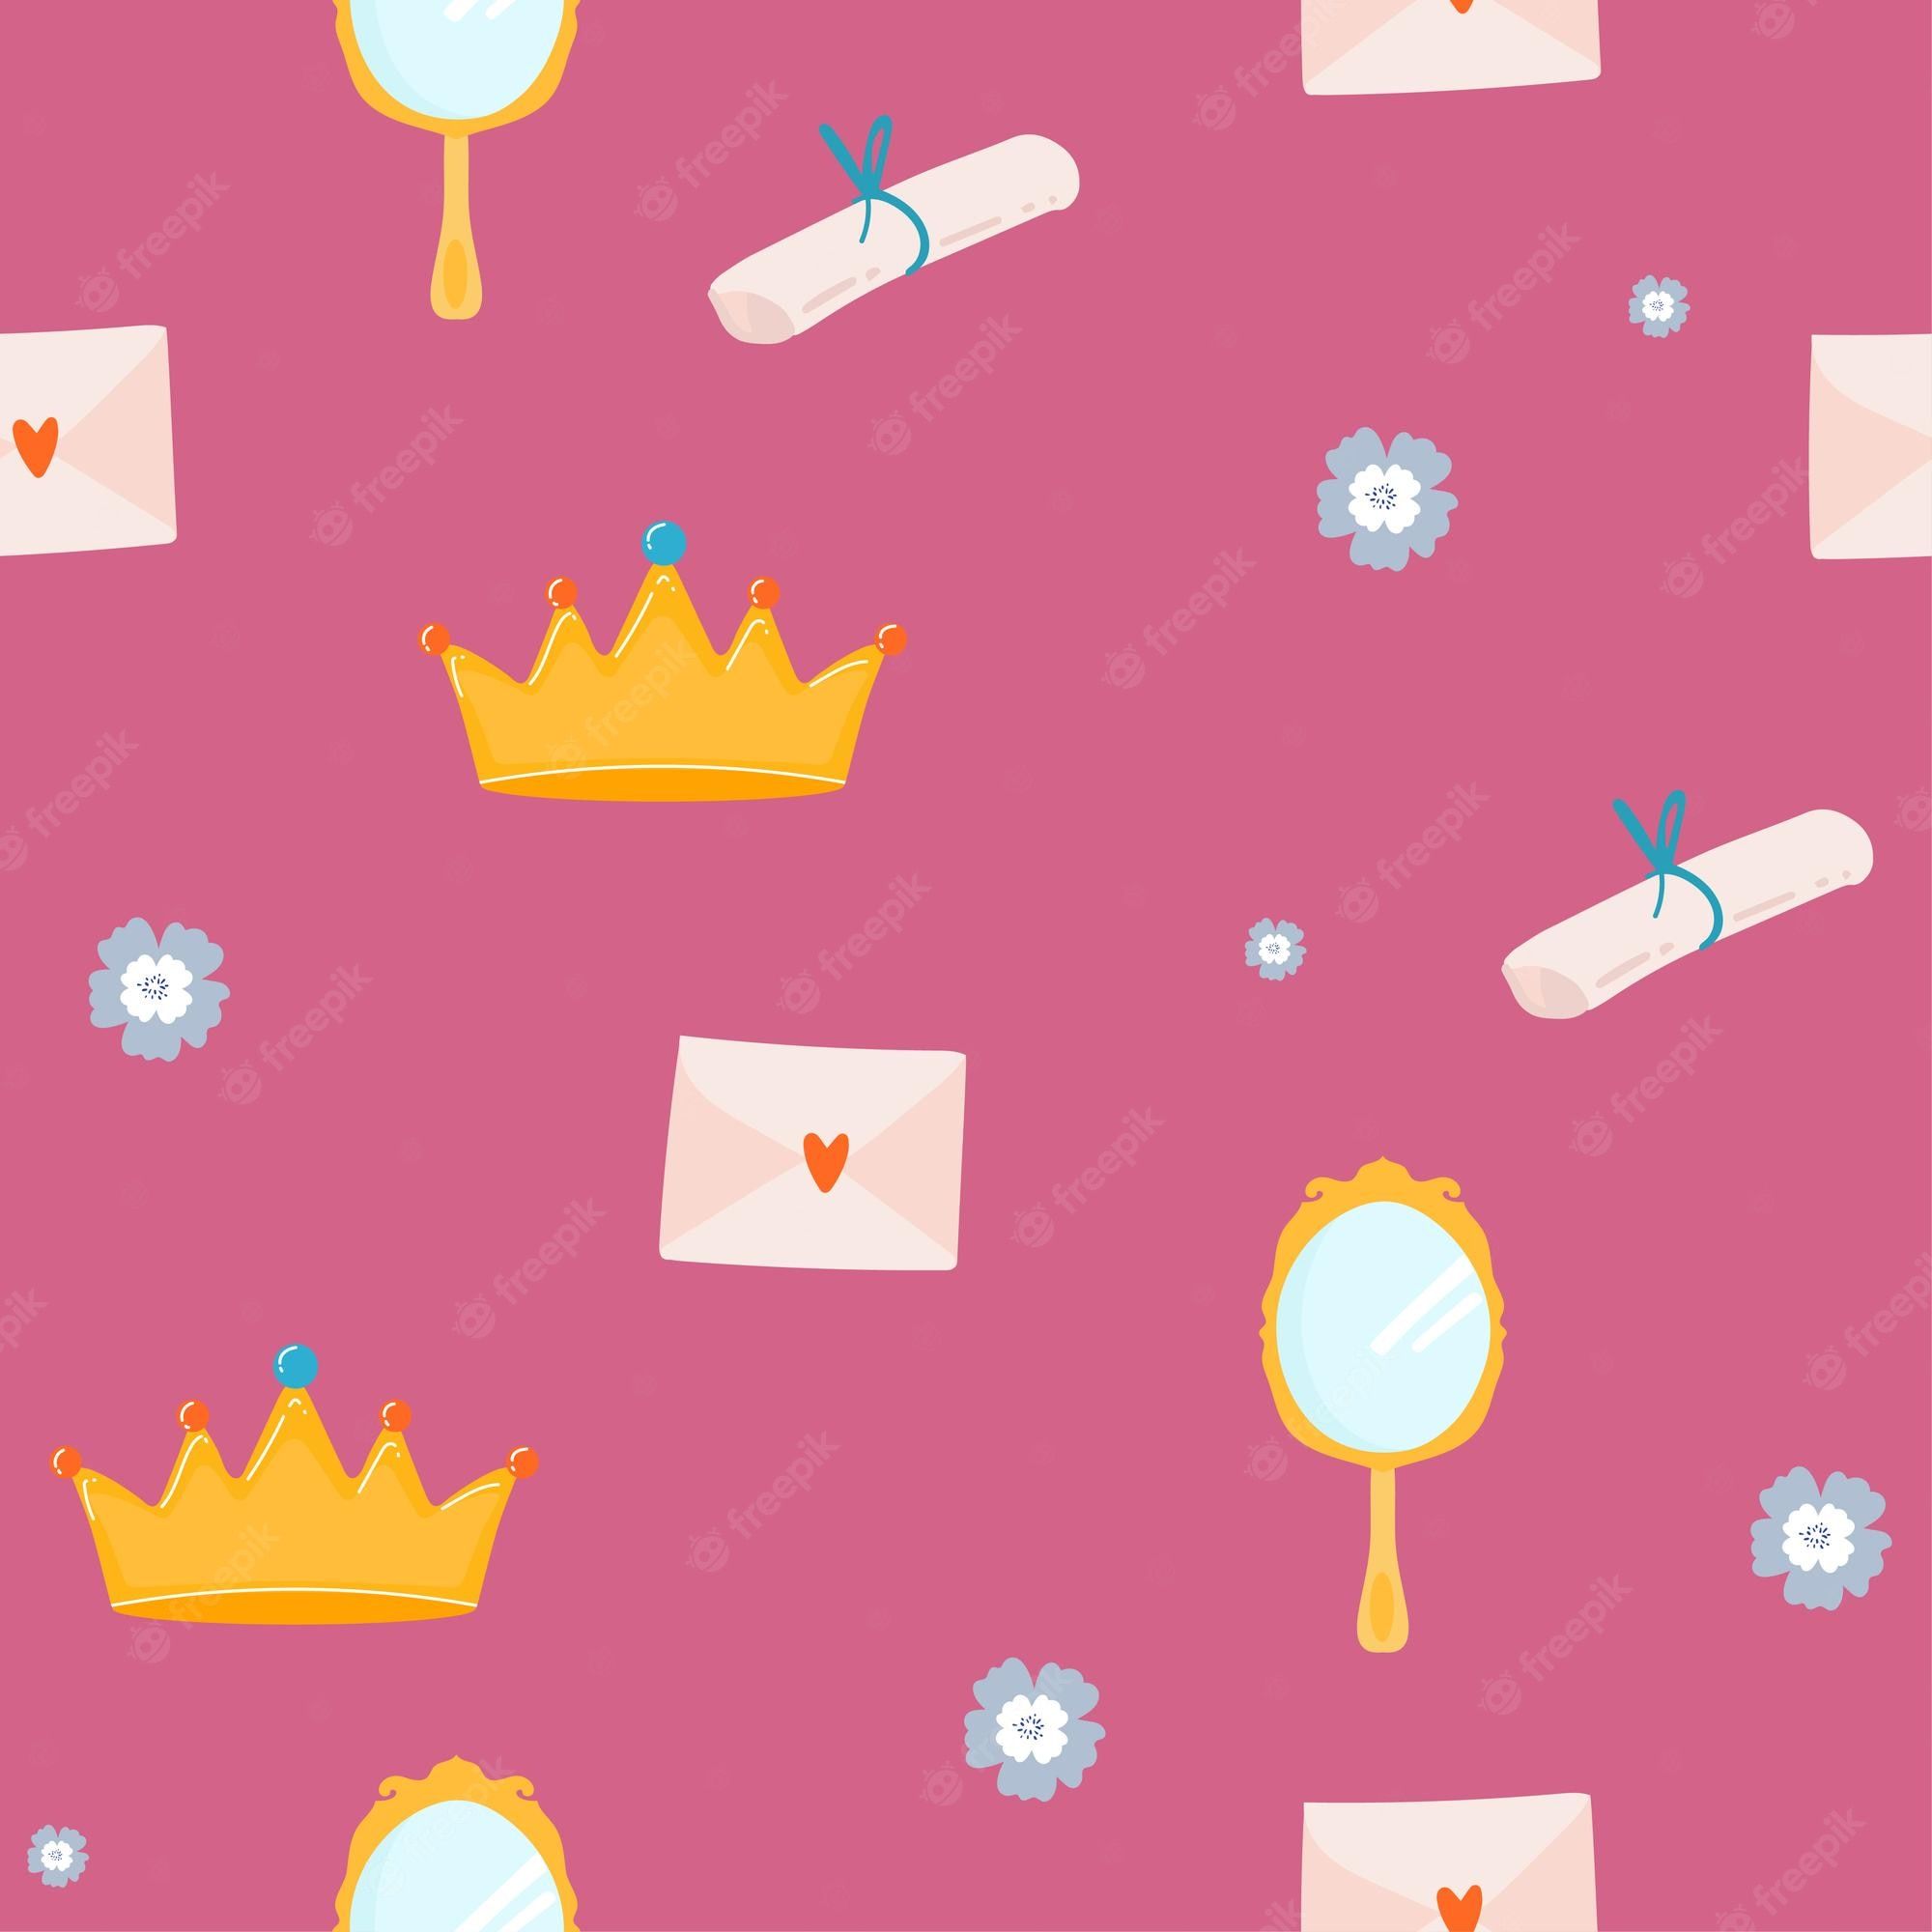 Seamless pattern with crowns, mirror, envelope and flowers on a pink background. - Crown